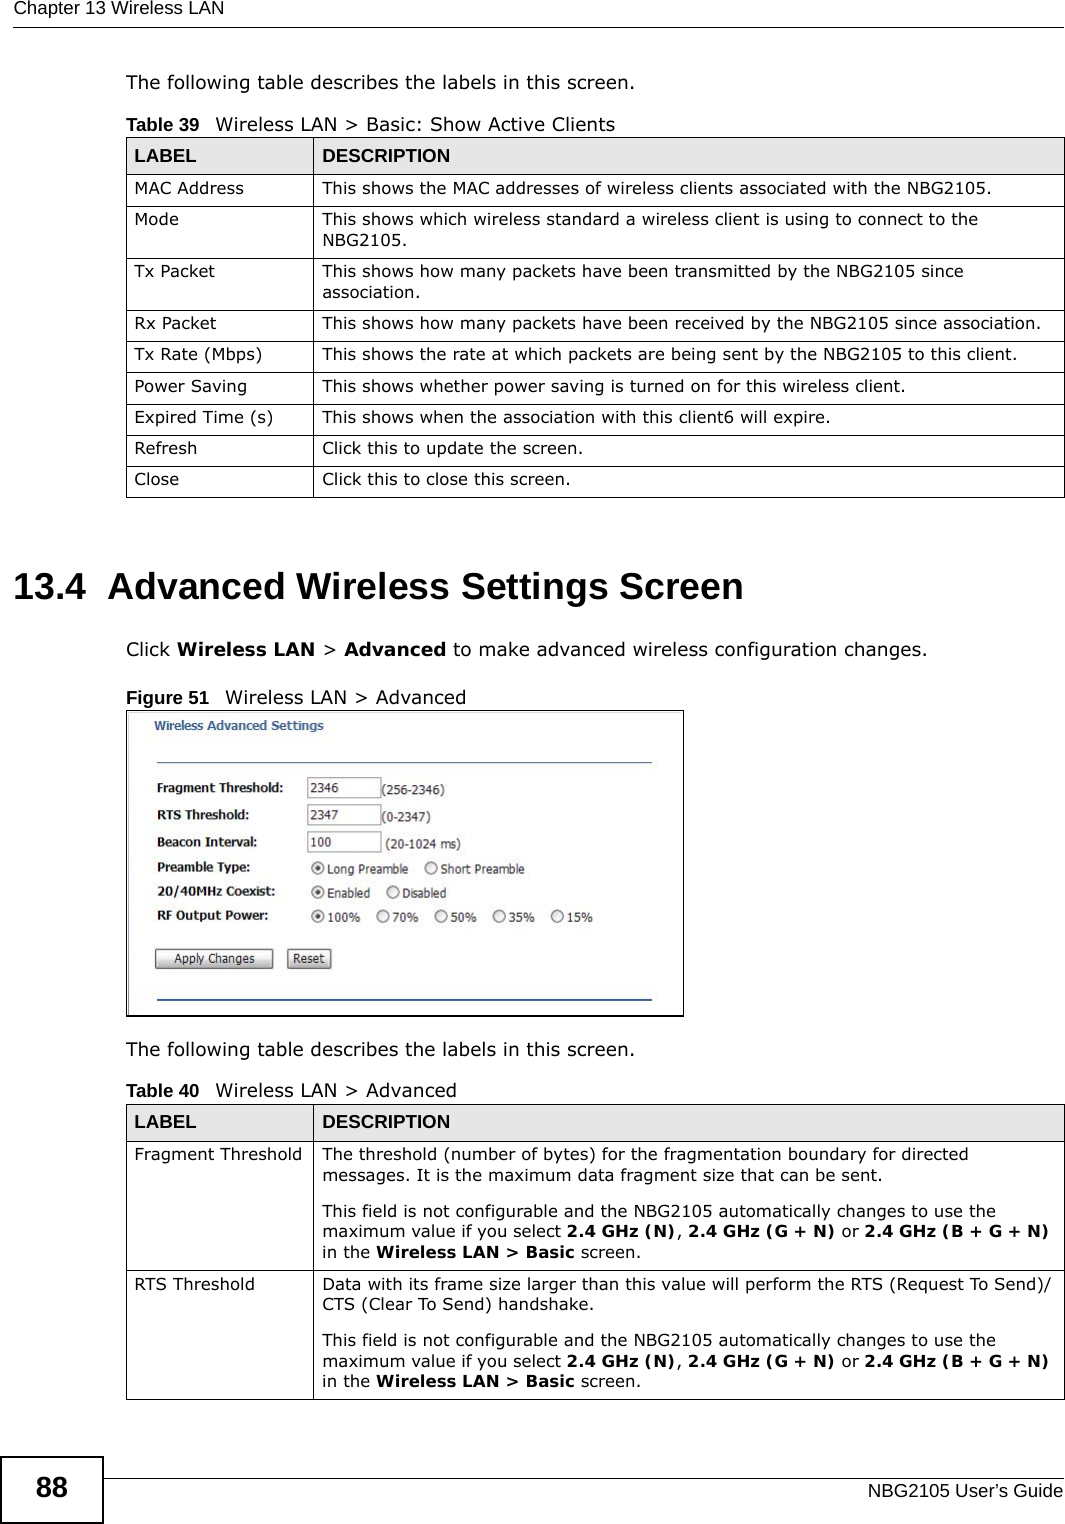 Chapter 13 Wireless LANNBG2105 User’s Guide88The following table describes the labels in this screen.13.4  Advanced Wireless Settings ScreenClick Wireless LAN &gt; Advanced to make advanced wireless configuration changes.Figure 51   Wireless LAN &gt; Advanced The following table describes the labels in this screen.Table 39   Wireless LAN &gt; Basic: Show Active ClientsLABEL DESCRIPTIONMAC Address This shows the MAC addresses of wireless clients associated with the NBG2105.Mode This shows which wireless standard a wireless client is using to connect to the NBG2105.Tx Packet This shows how many packets have been transmitted by the NBG2105 since association.Rx Packet This shows how many packets have been received by the NBG2105 since association.Tx Rate (Mbps) This shows the rate at which packets are being sent by the NBG2105 to this client.Power Saving This shows whether power saving is turned on for this wireless client.Expired Time (s) This shows when the association with this client6 will expire.Refresh Click this to update the screen.Close  Click this to close this screen.Table 40   Wireless LAN &gt; AdvancedLABEL DESCRIPTIONFragment Threshold The threshold (number of bytes) for the fragmentation boundary for directed messages. It is the maximum data fragment size that can be sent. This field is not configurable and the NBG2105 automatically changes to use the maximum value if you select 2.4 GHz (N), 2.4 GHz (G + N) or 2.4 GHz (B + G + N) in the Wireless LAN &gt; Basic screen.RTS Threshold Data with its frame size larger than this value will perform the RTS (Request To Send)/CTS (Clear To Send) handshake. This field is not configurable and the NBG2105 automatically changes to use the maximum value if you select 2.4 GHz (N), 2.4 GHz (G + N) or 2.4 GHz (B + G + N) in the Wireless LAN &gt; Basic screen.